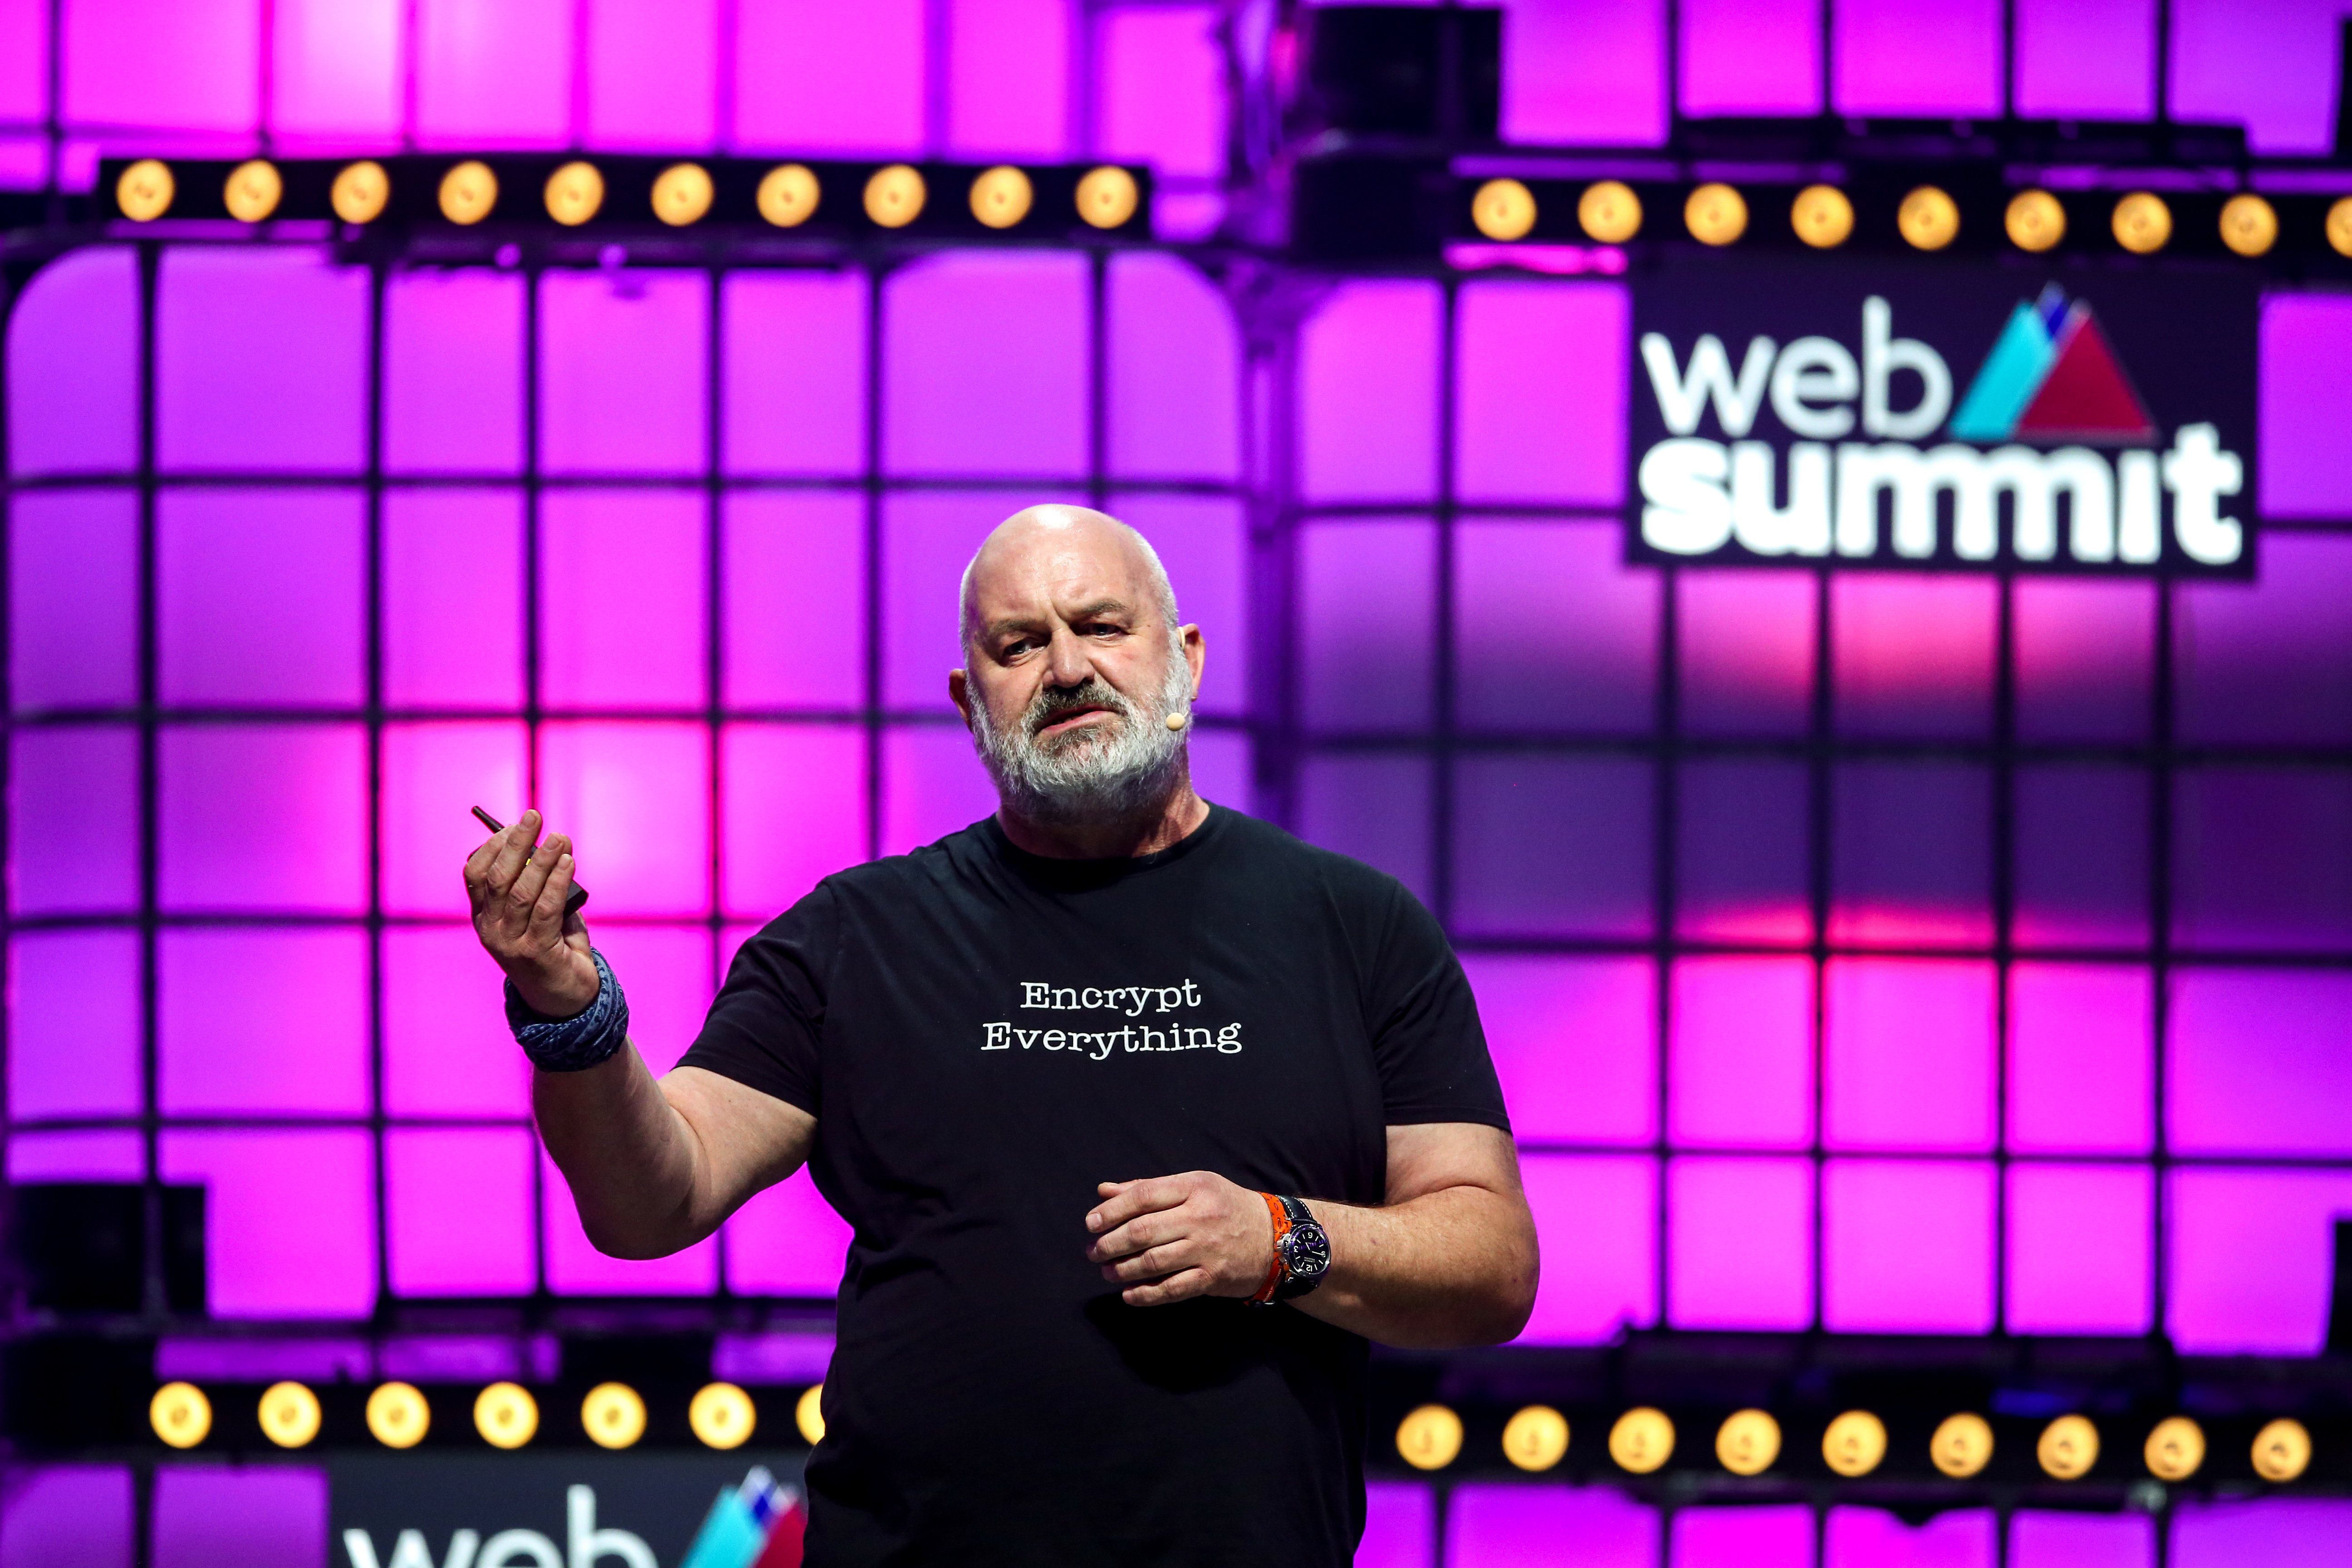 Werner Vogels - Encrypt Everything, Web Summit 2019, CC BY 2.0, Wikipedia Commons